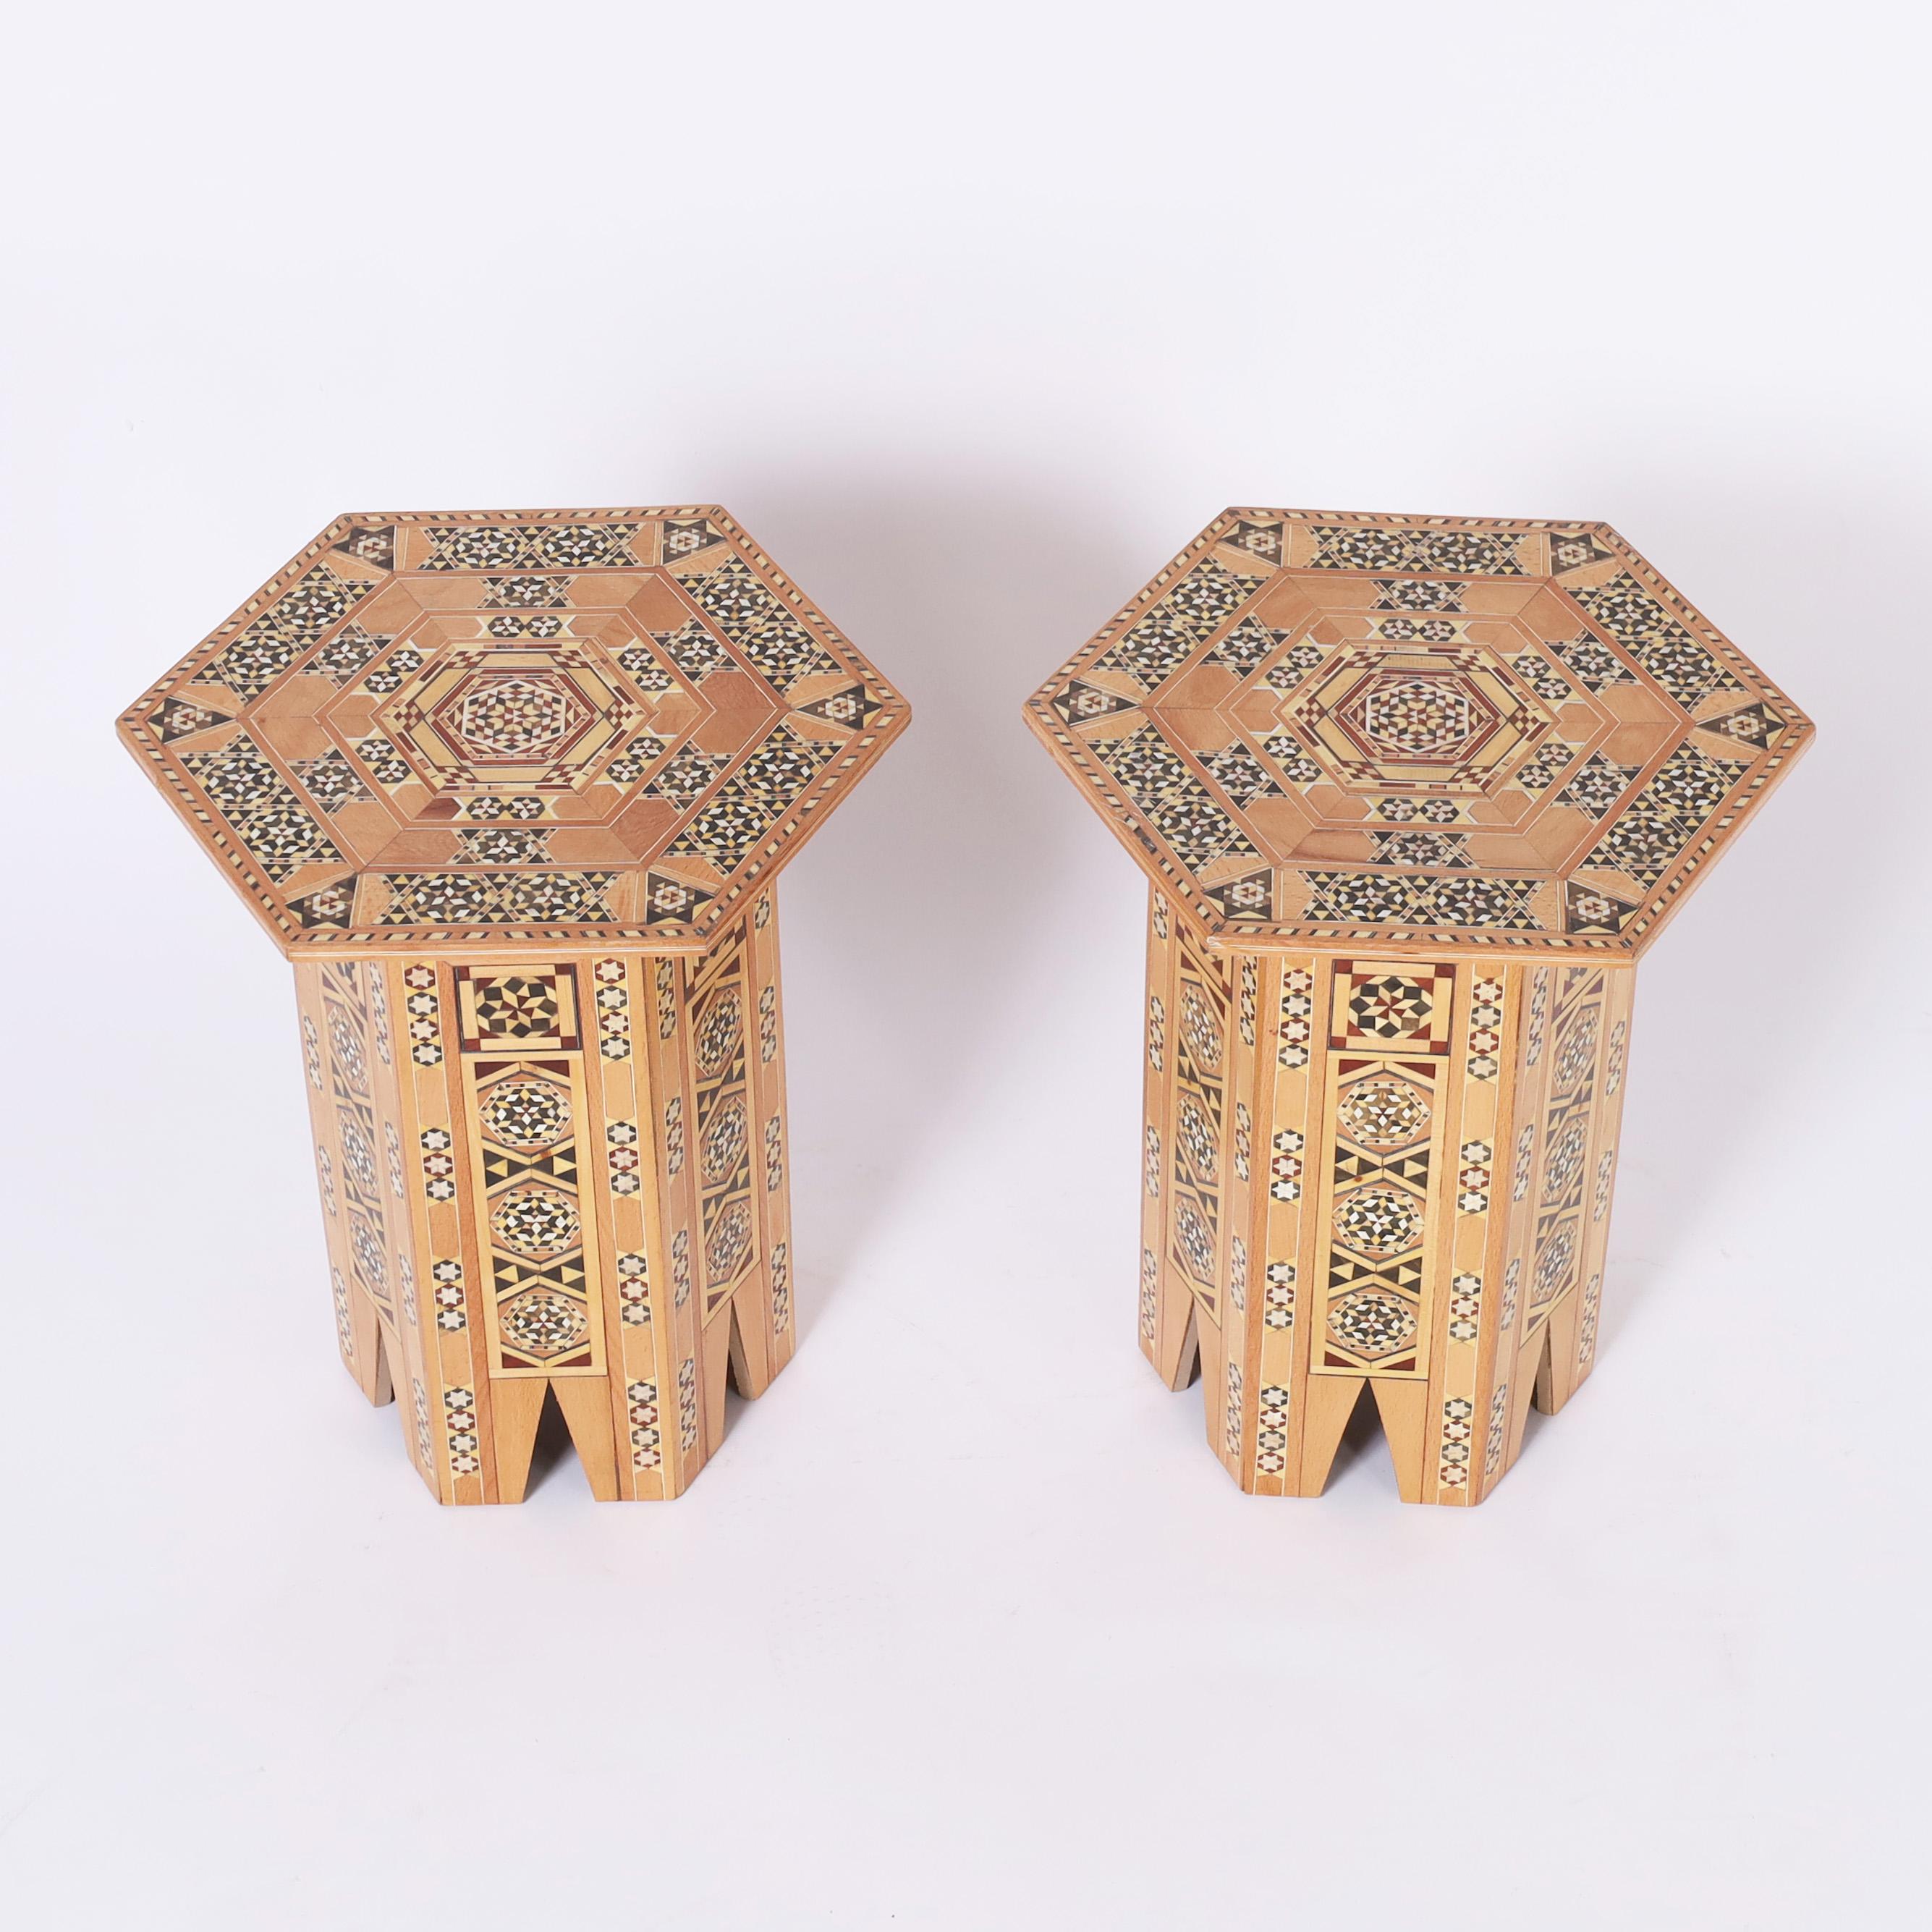 Impressive pair of Moroccan stands with elaborate inlaid geometric marquetry composed of exotic woods such as mahogany, ebony, walnut, white wood and yellow poplar over a hexagon form with stylized arches. 